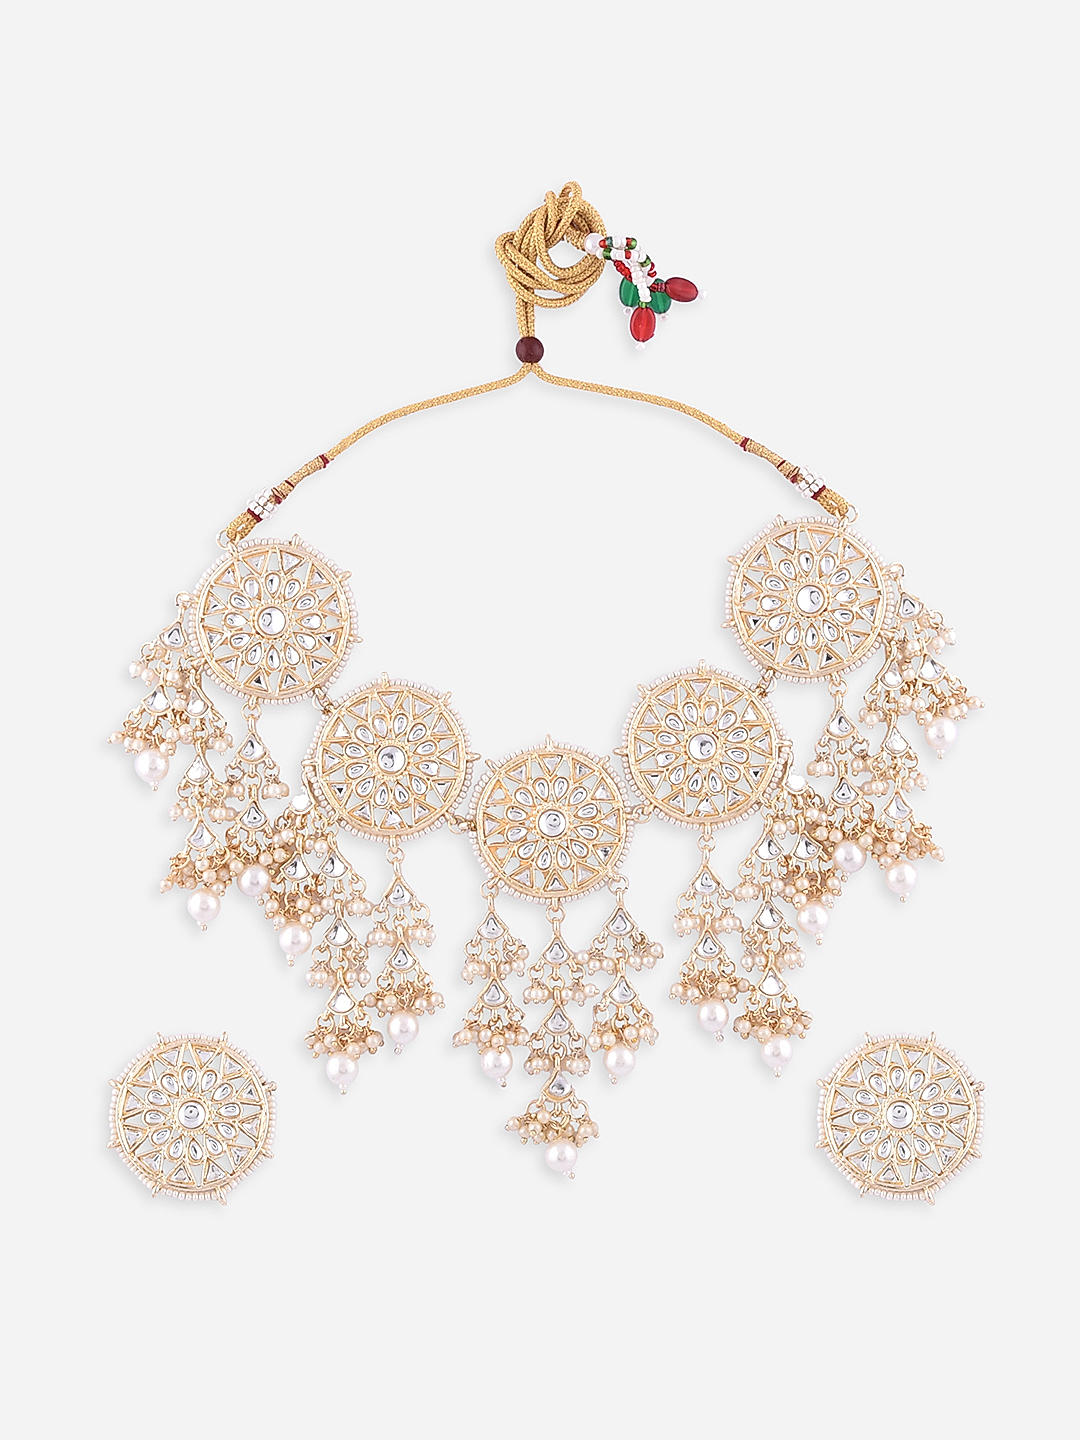 Janekelly Bridal Zirconia Jewelry Set Diamante Necklace And Earrings, And  Brooch With CZ Crystal Perfect For Weddings And Parties Available In Dubai  And Nigeria B230619 From Bian03, $45.51 | DHgate.Com